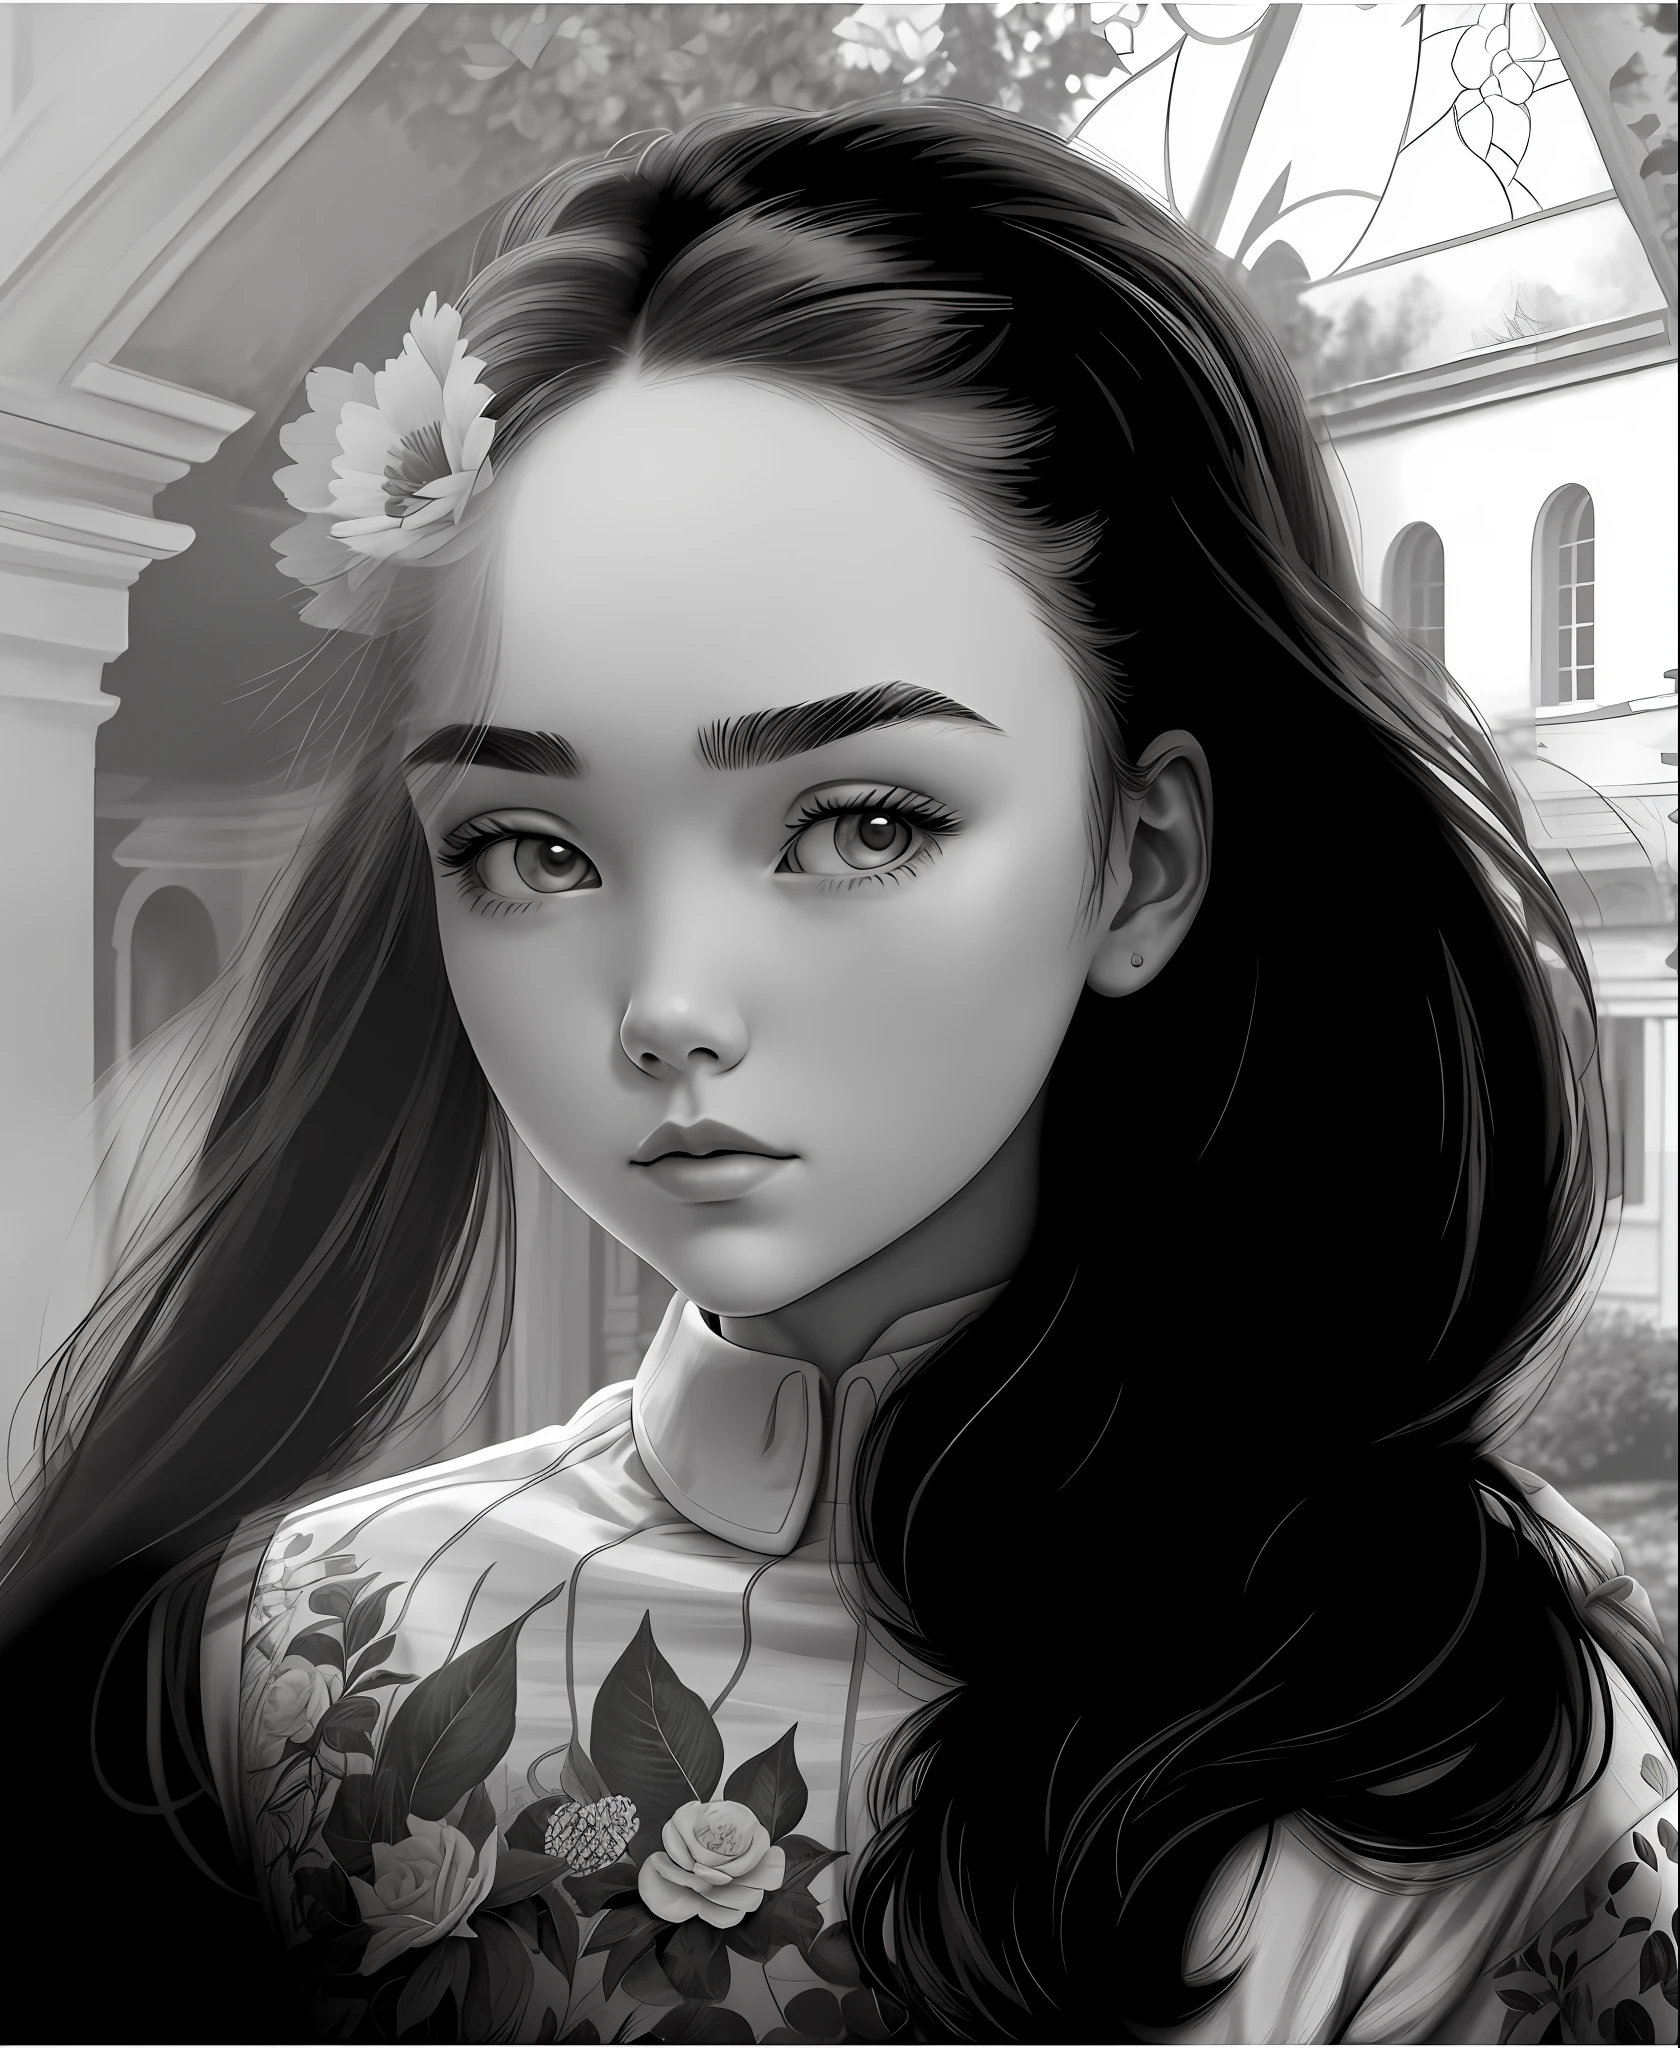 masterpiece, line art of a female character, Florence Pugh shocked expression, detailed country garden background, Art Deco designs,
style by double exposure, no shading, for coloring page, white space, no shadowing,